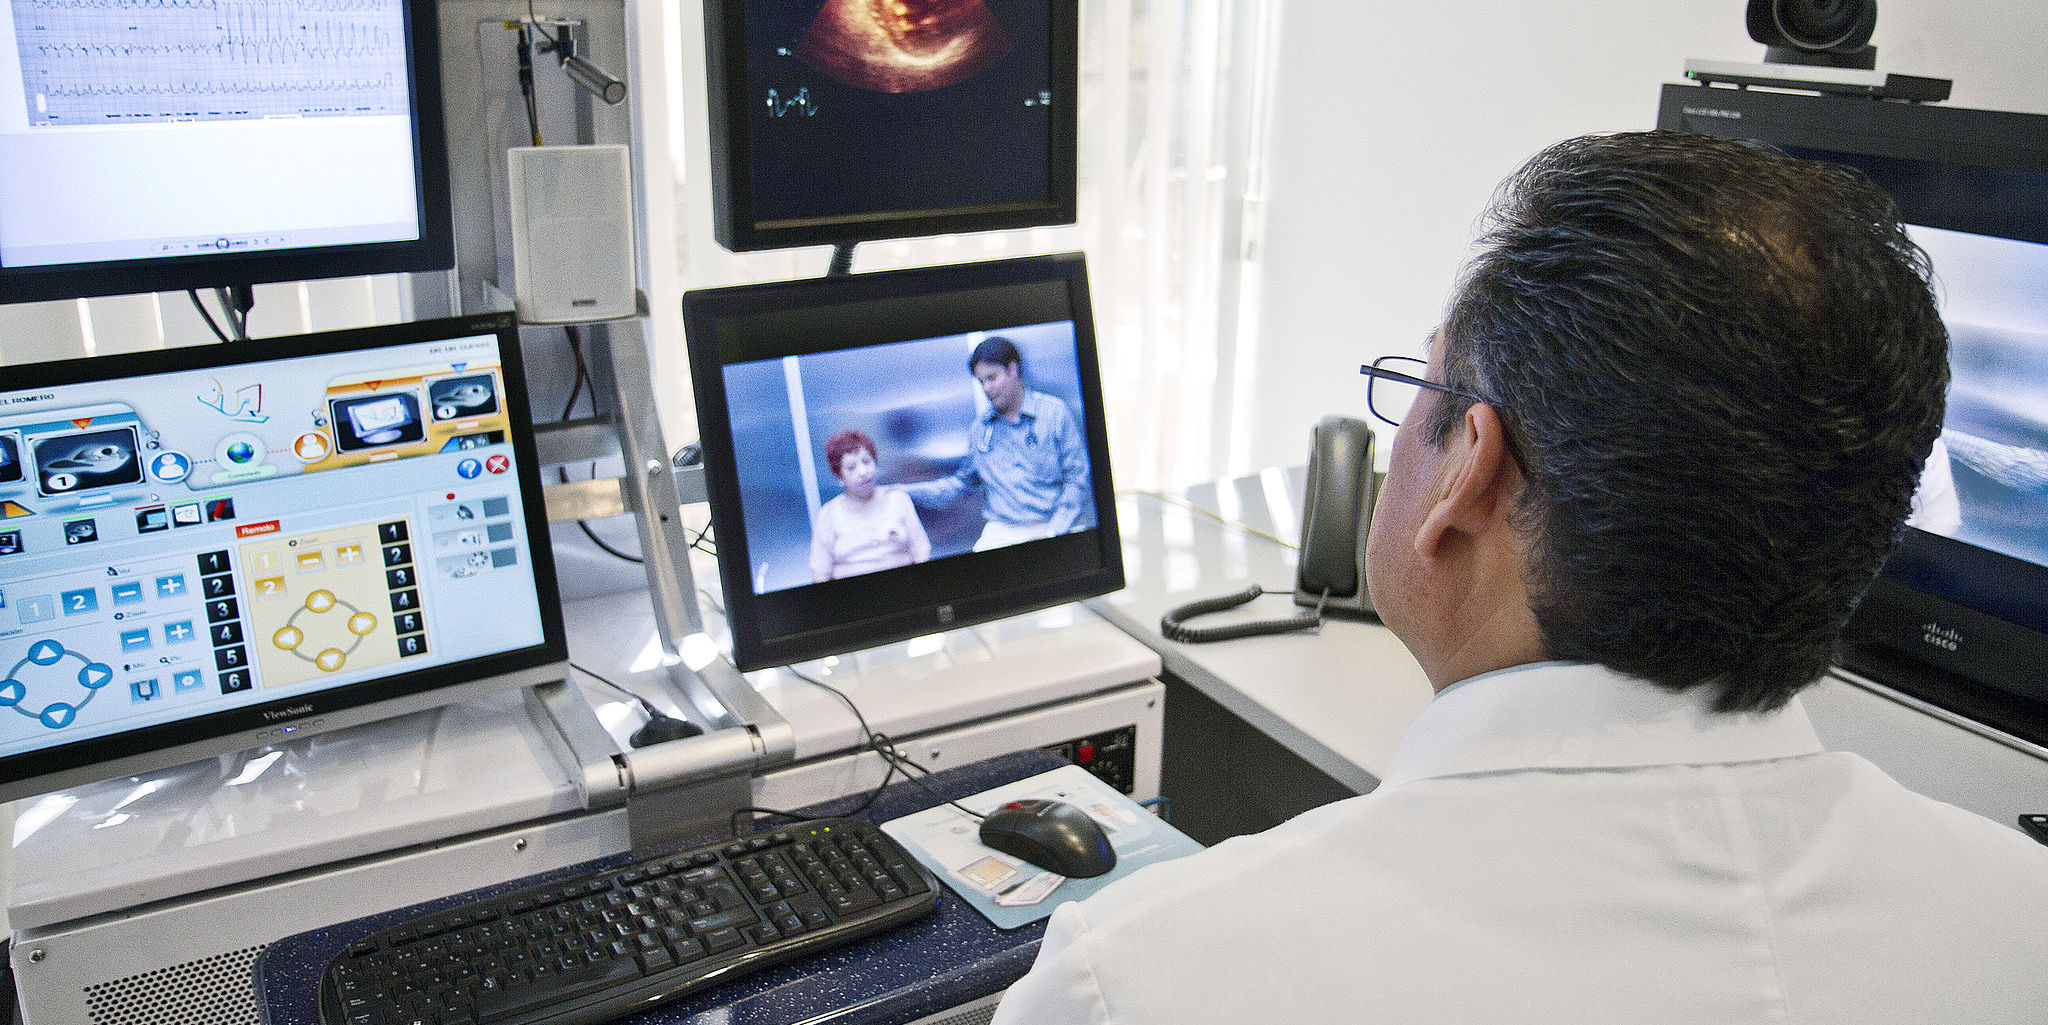 Skyping with your doctor? State may expand electronic medical care